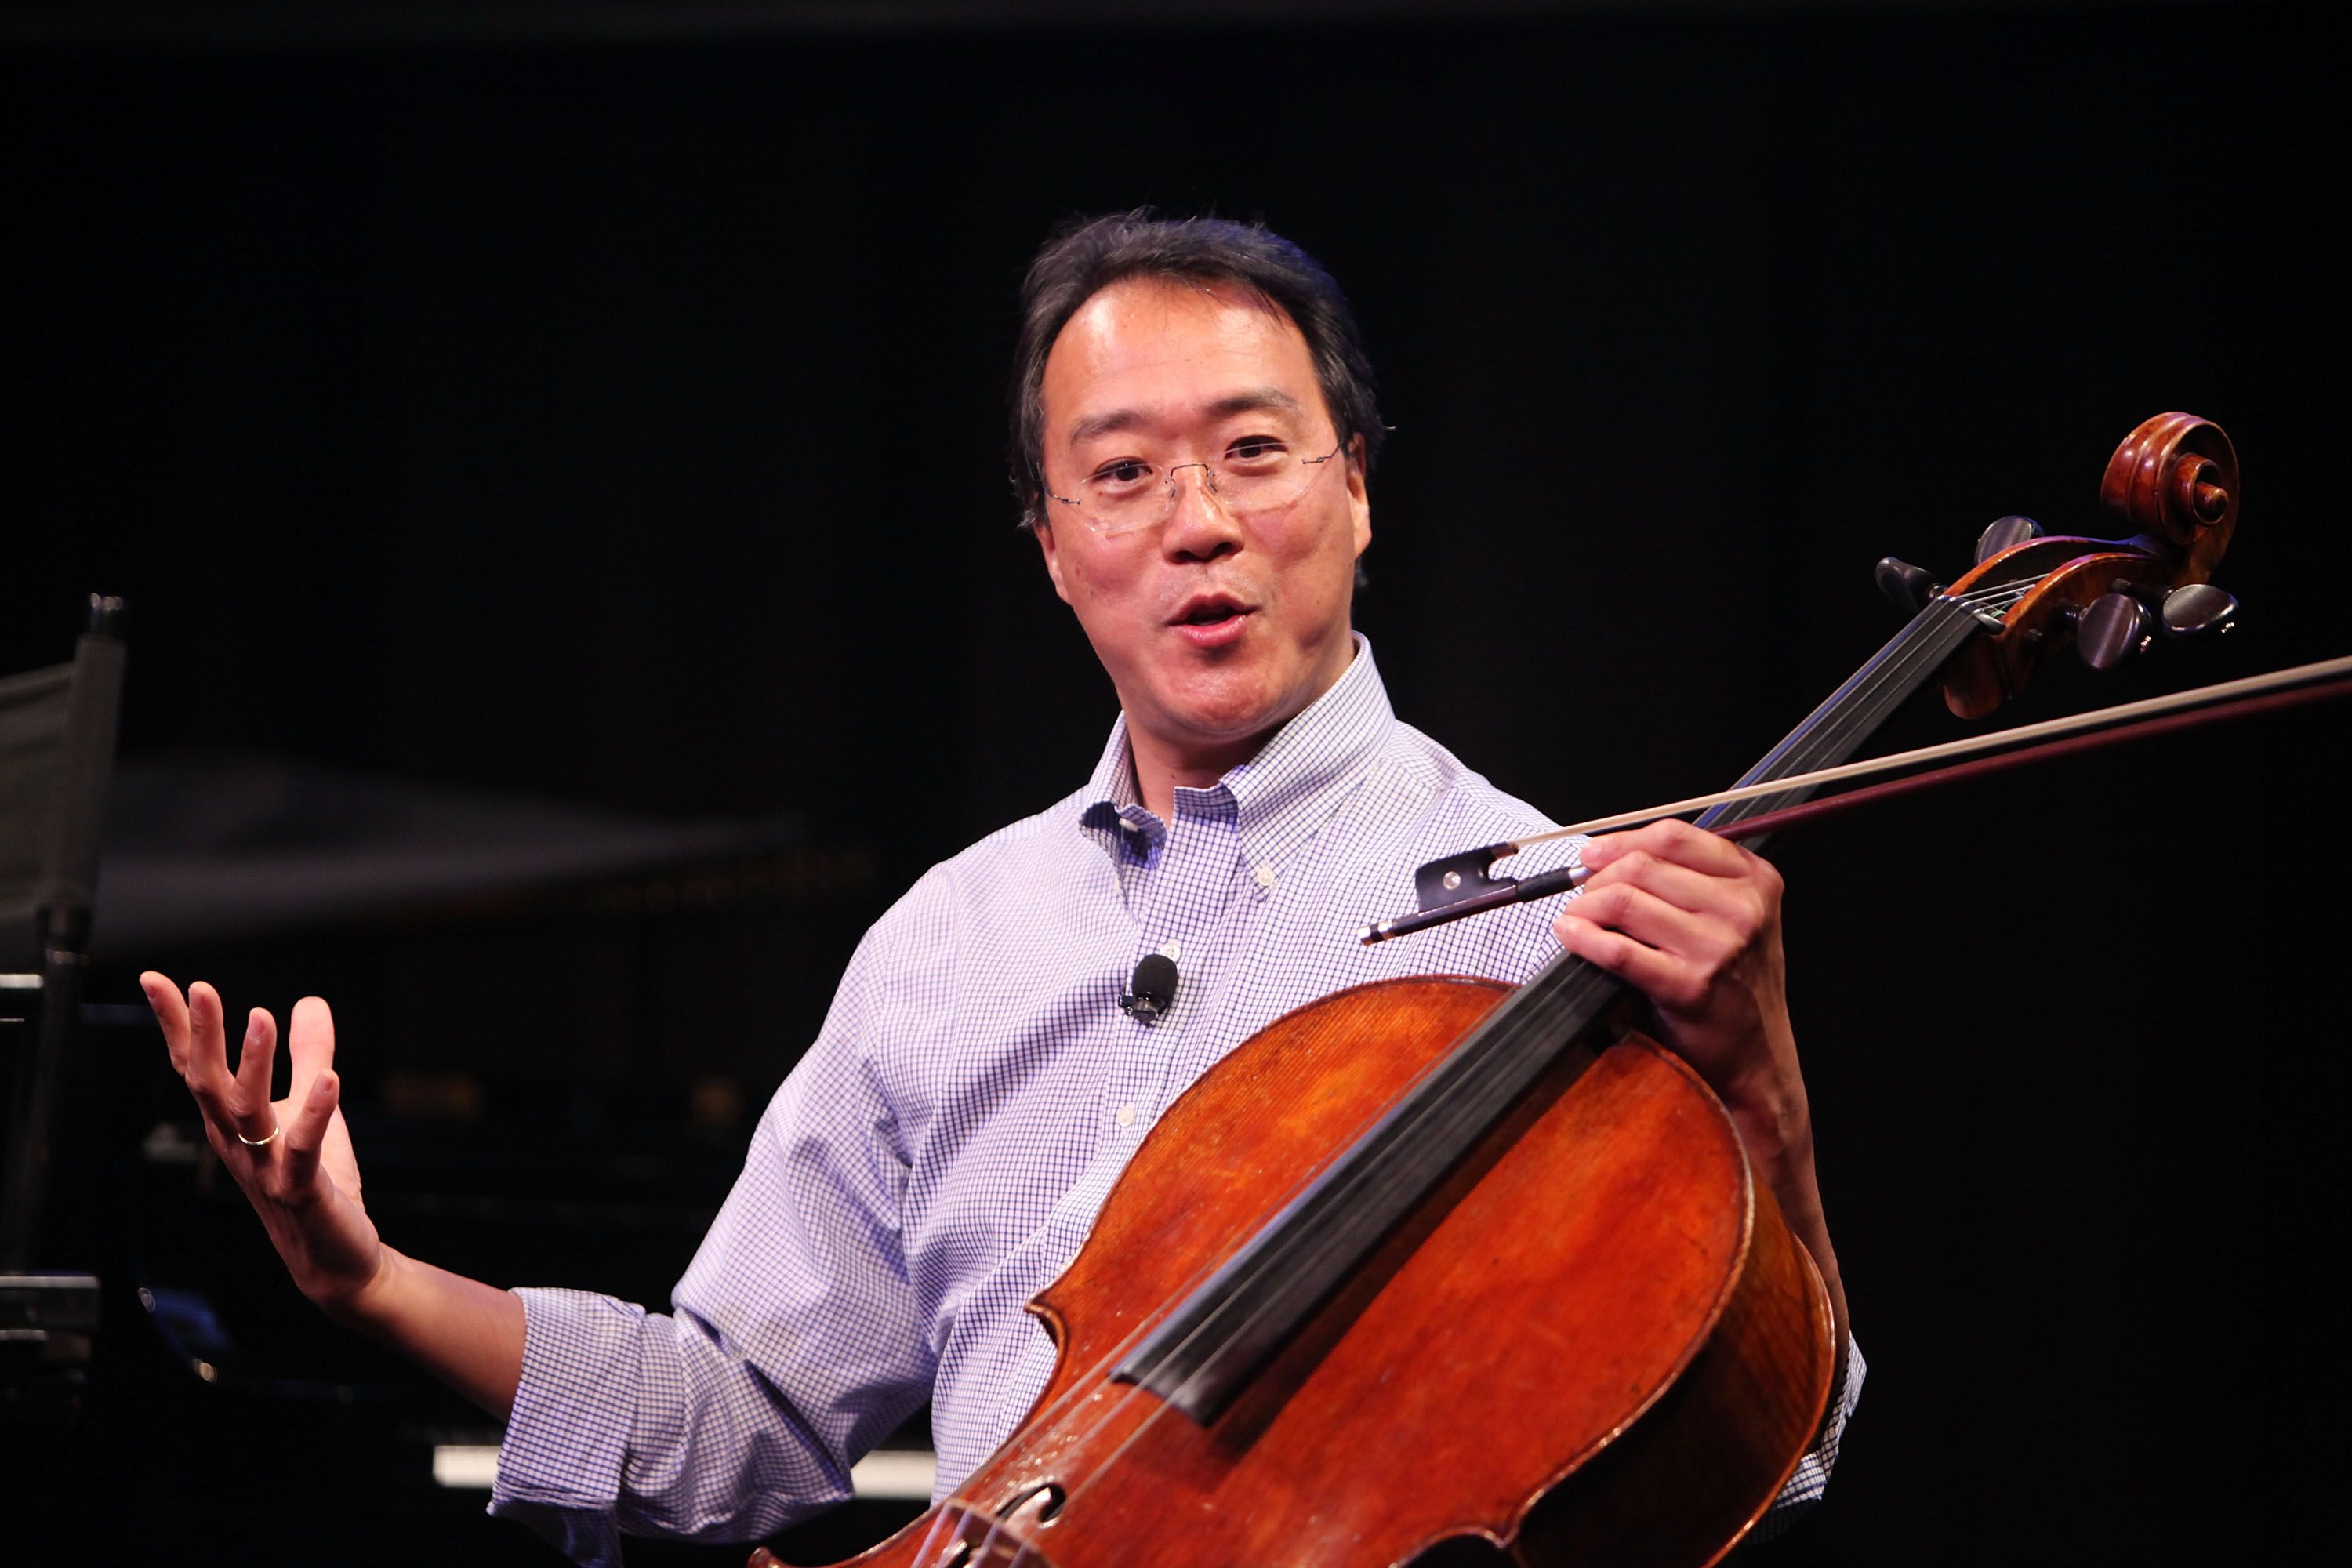 YoYo Ma Live at Red Rocks Buy Tickets for Aug 1, 2018